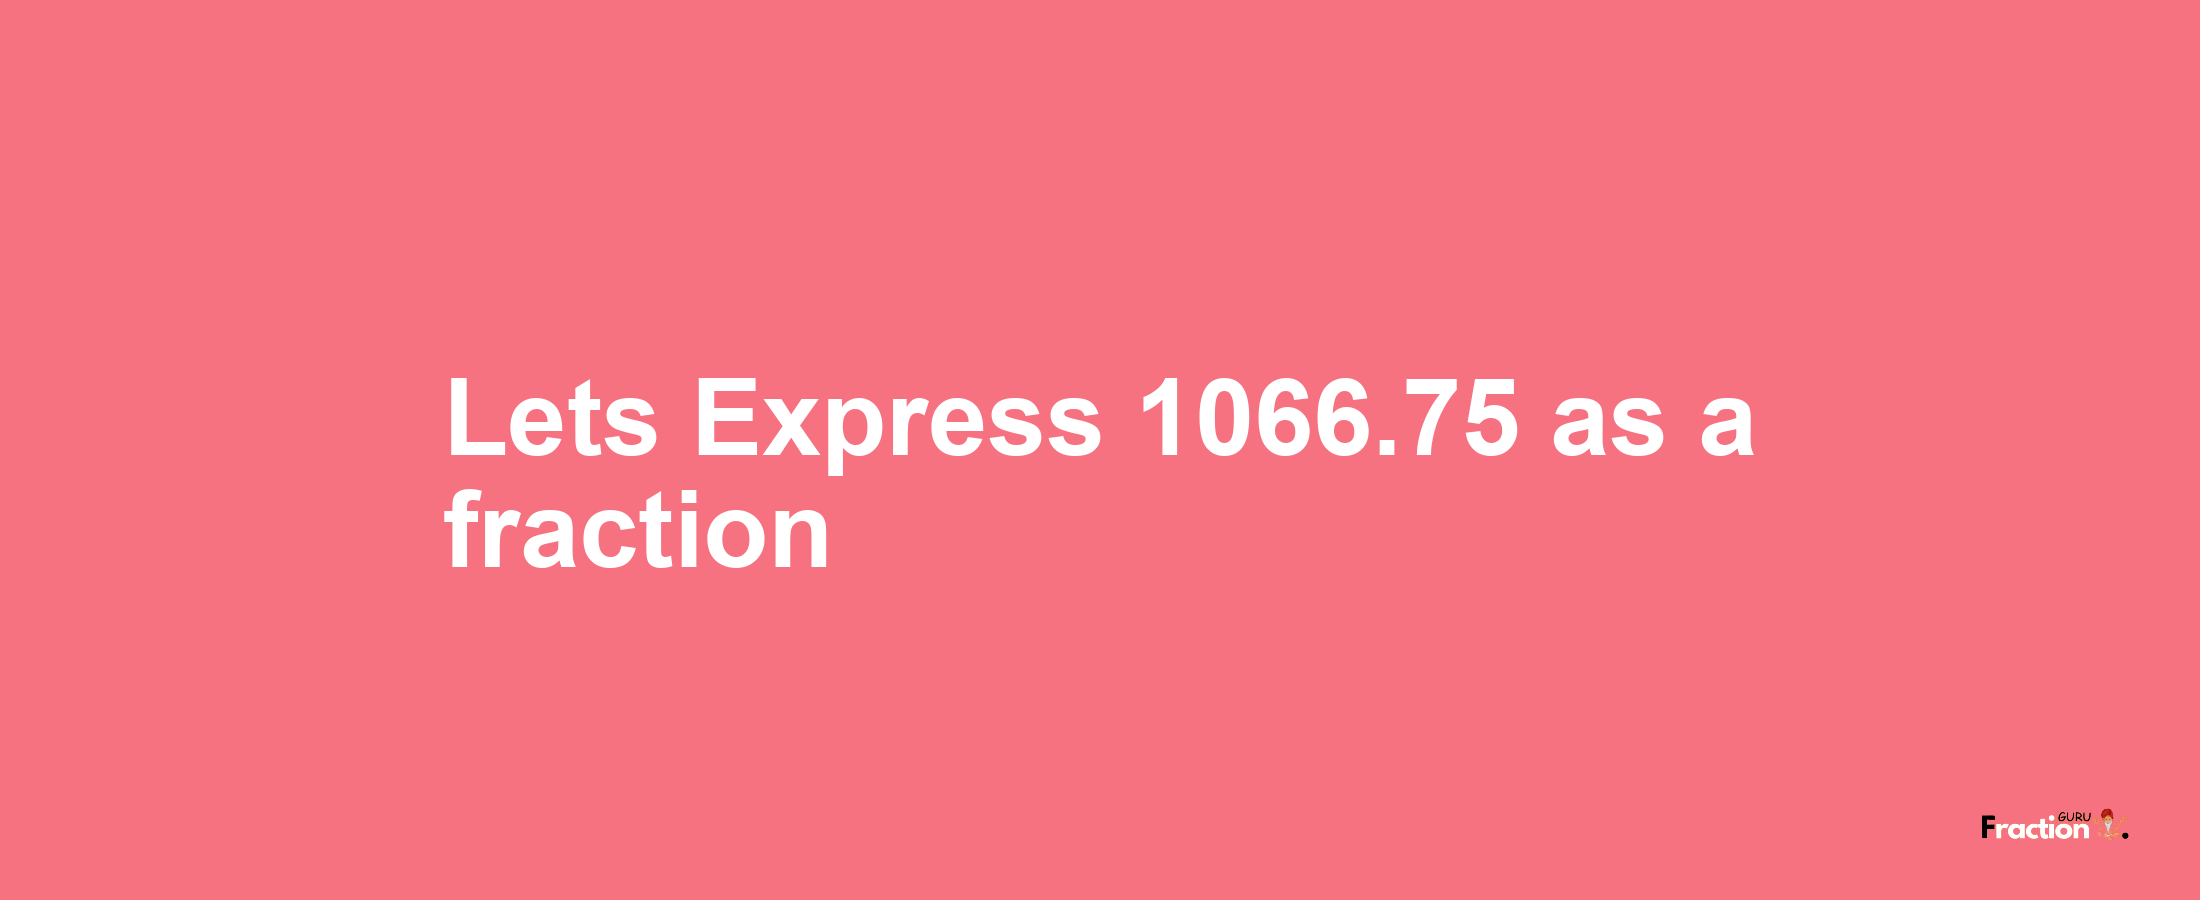 Lets Express 1066.75 as afraction